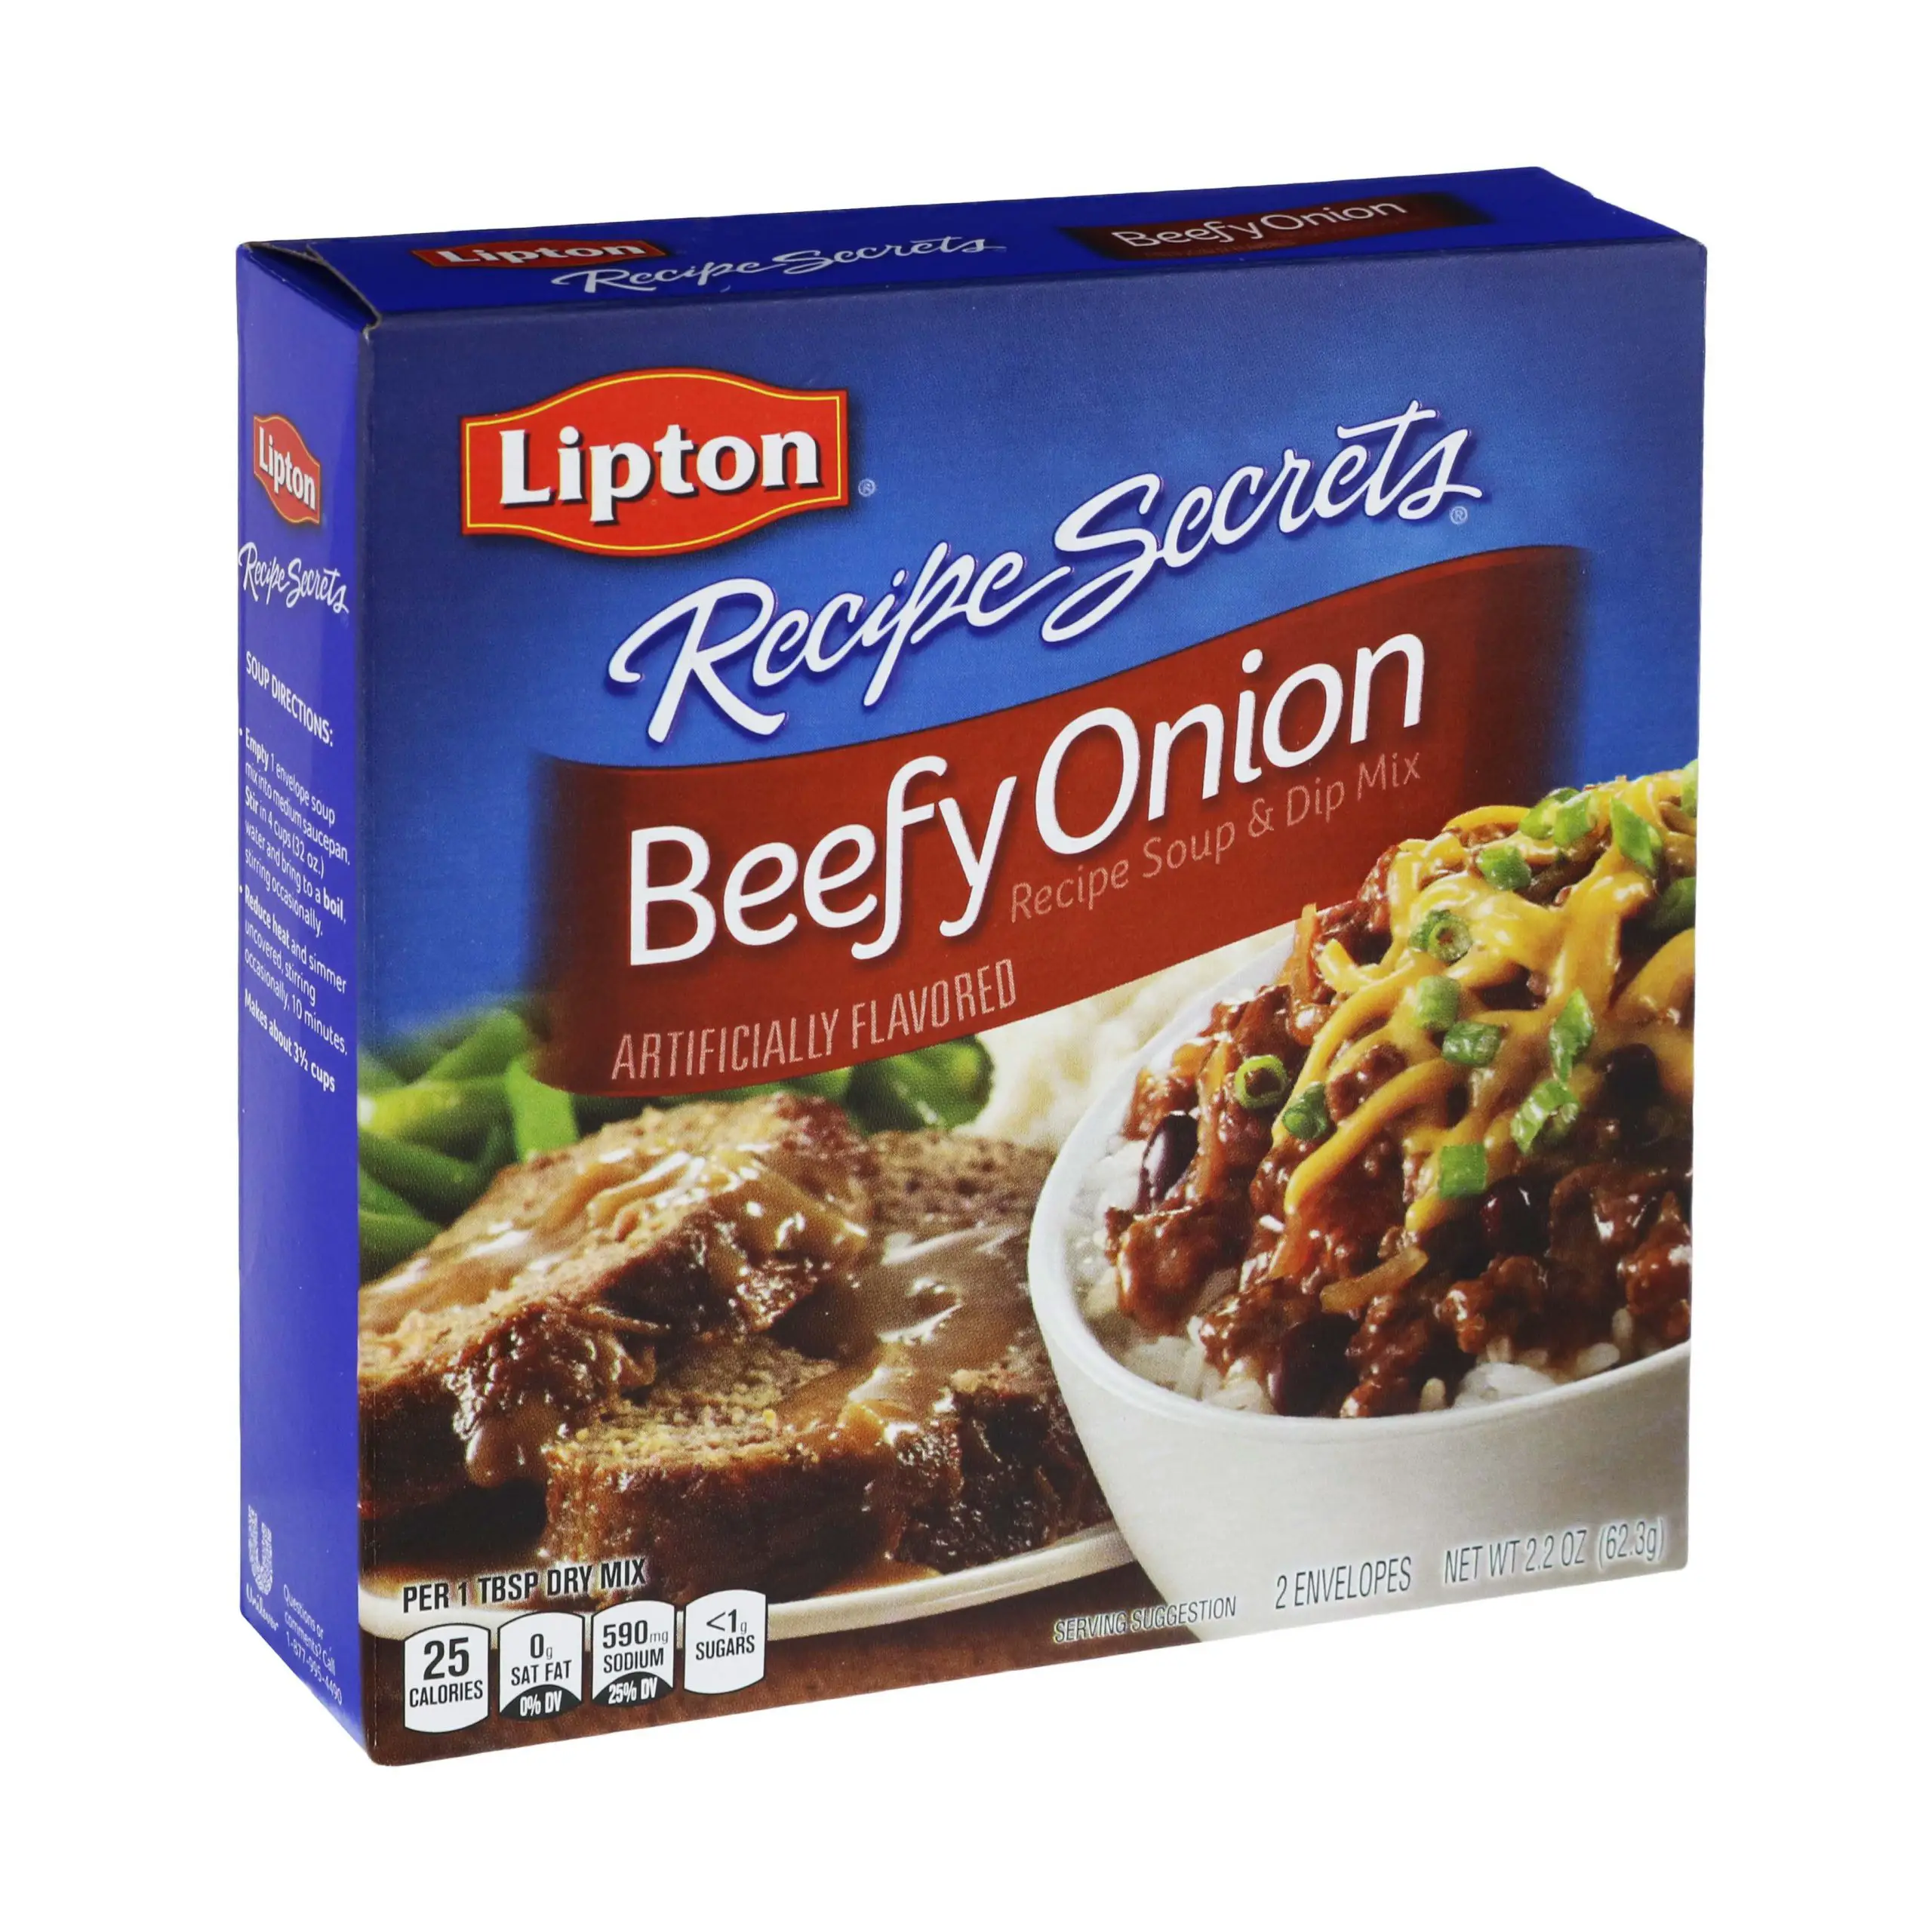 Beef Stew Made With Lipton Onion Soup Mix